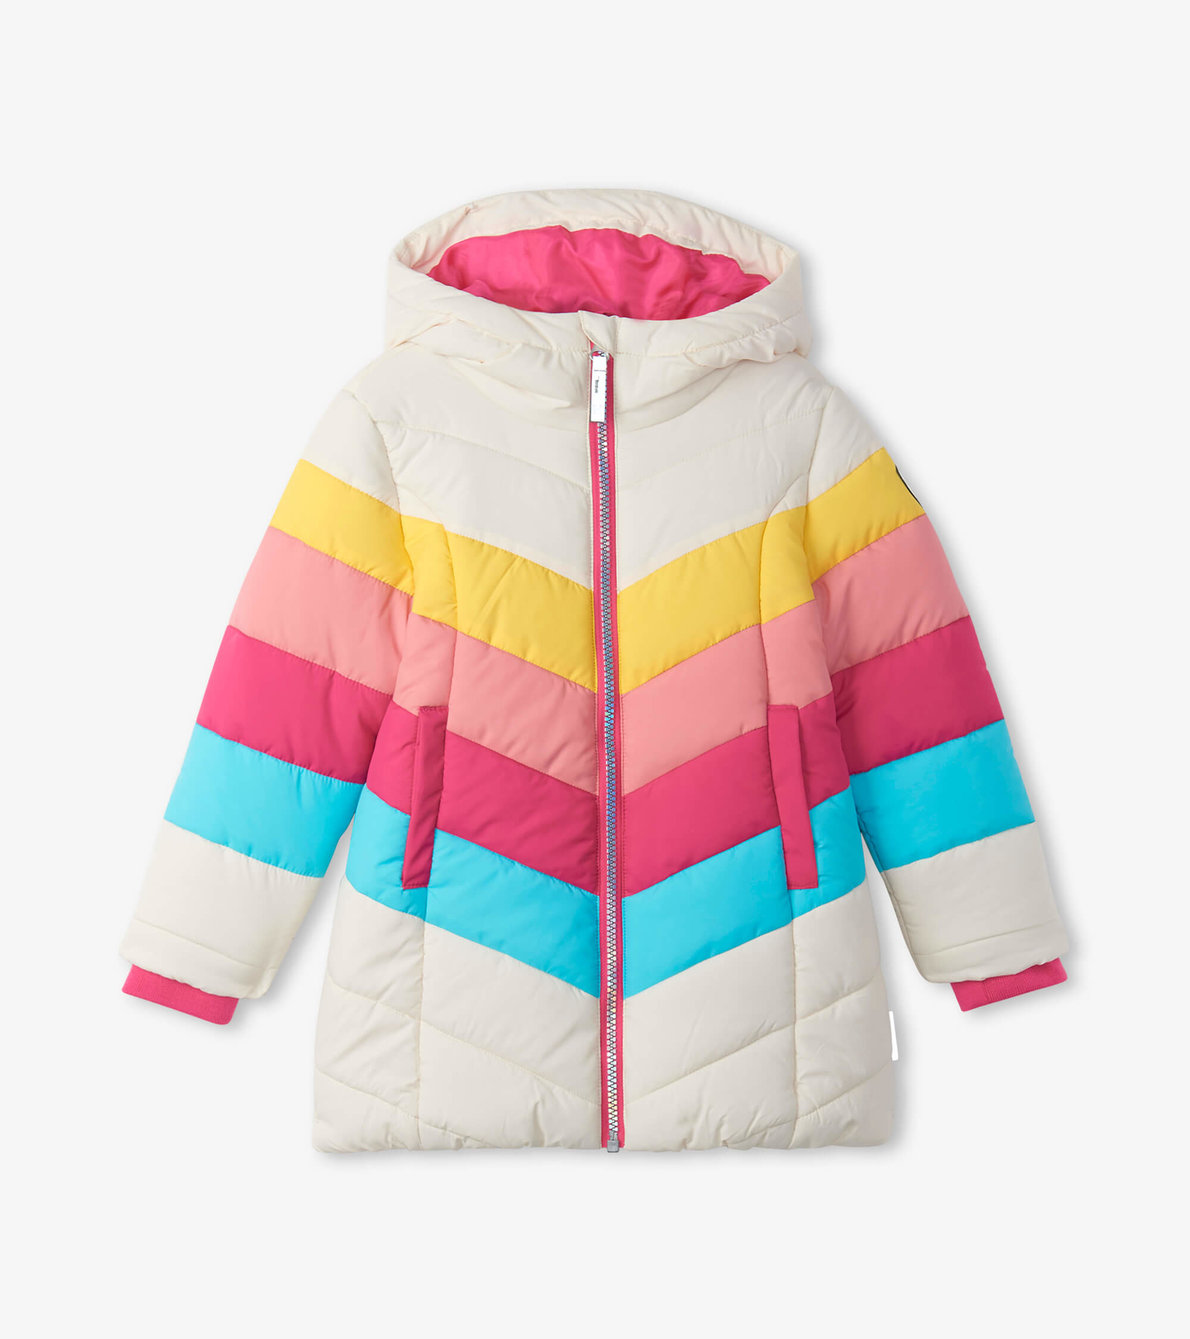 View larger image of Retro Rainbow Stripes Puffer Jacket